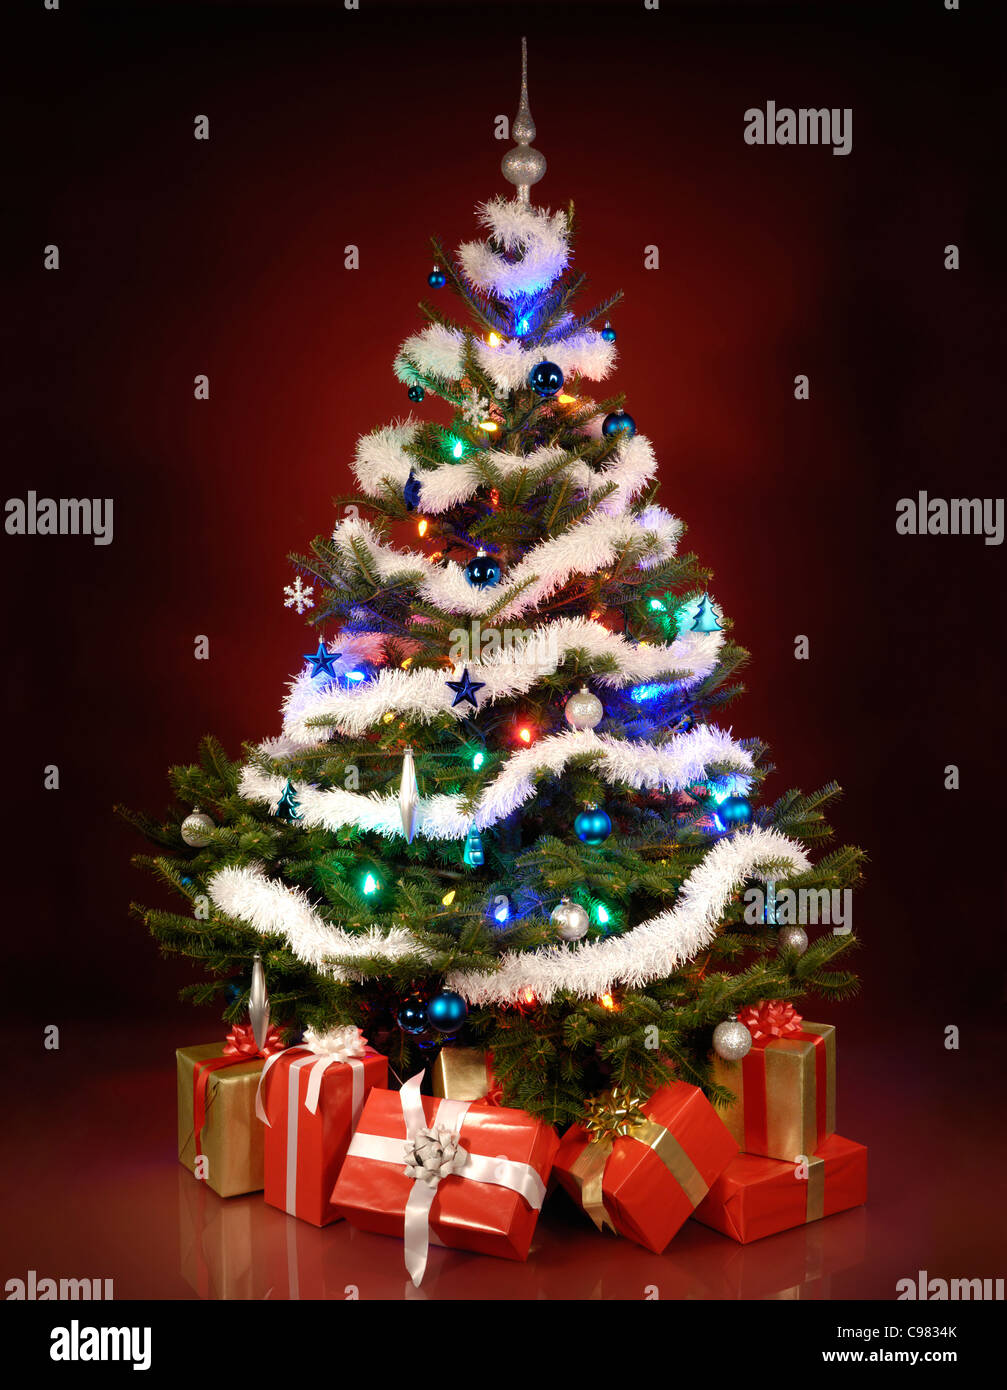 Shining decorated Christmas tree with gifts under it. Isolated on dark red background. Stock Photo